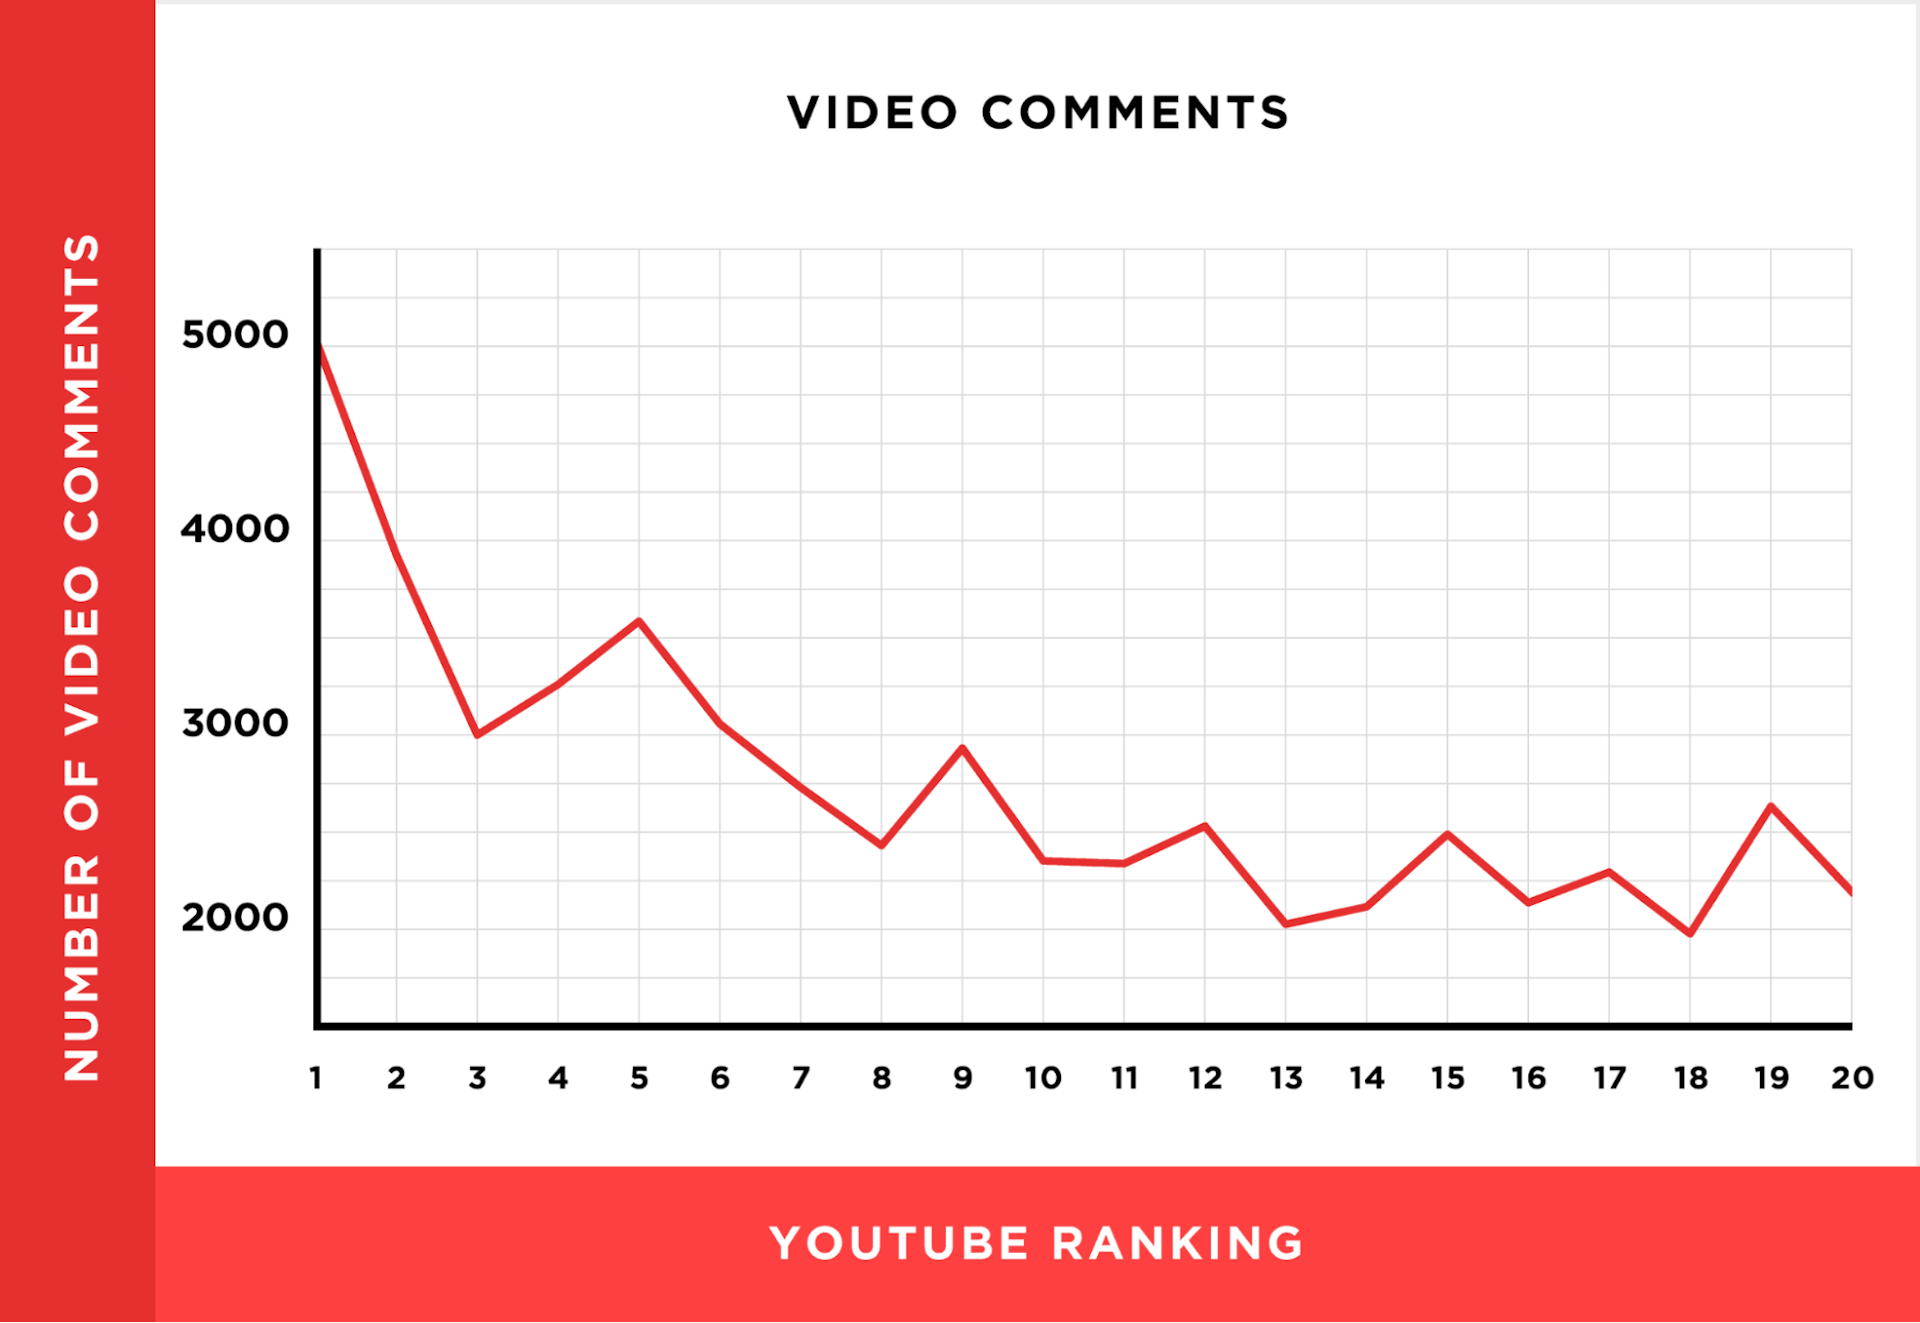 Examples of YouTube video comments correlated with youtube video rankings